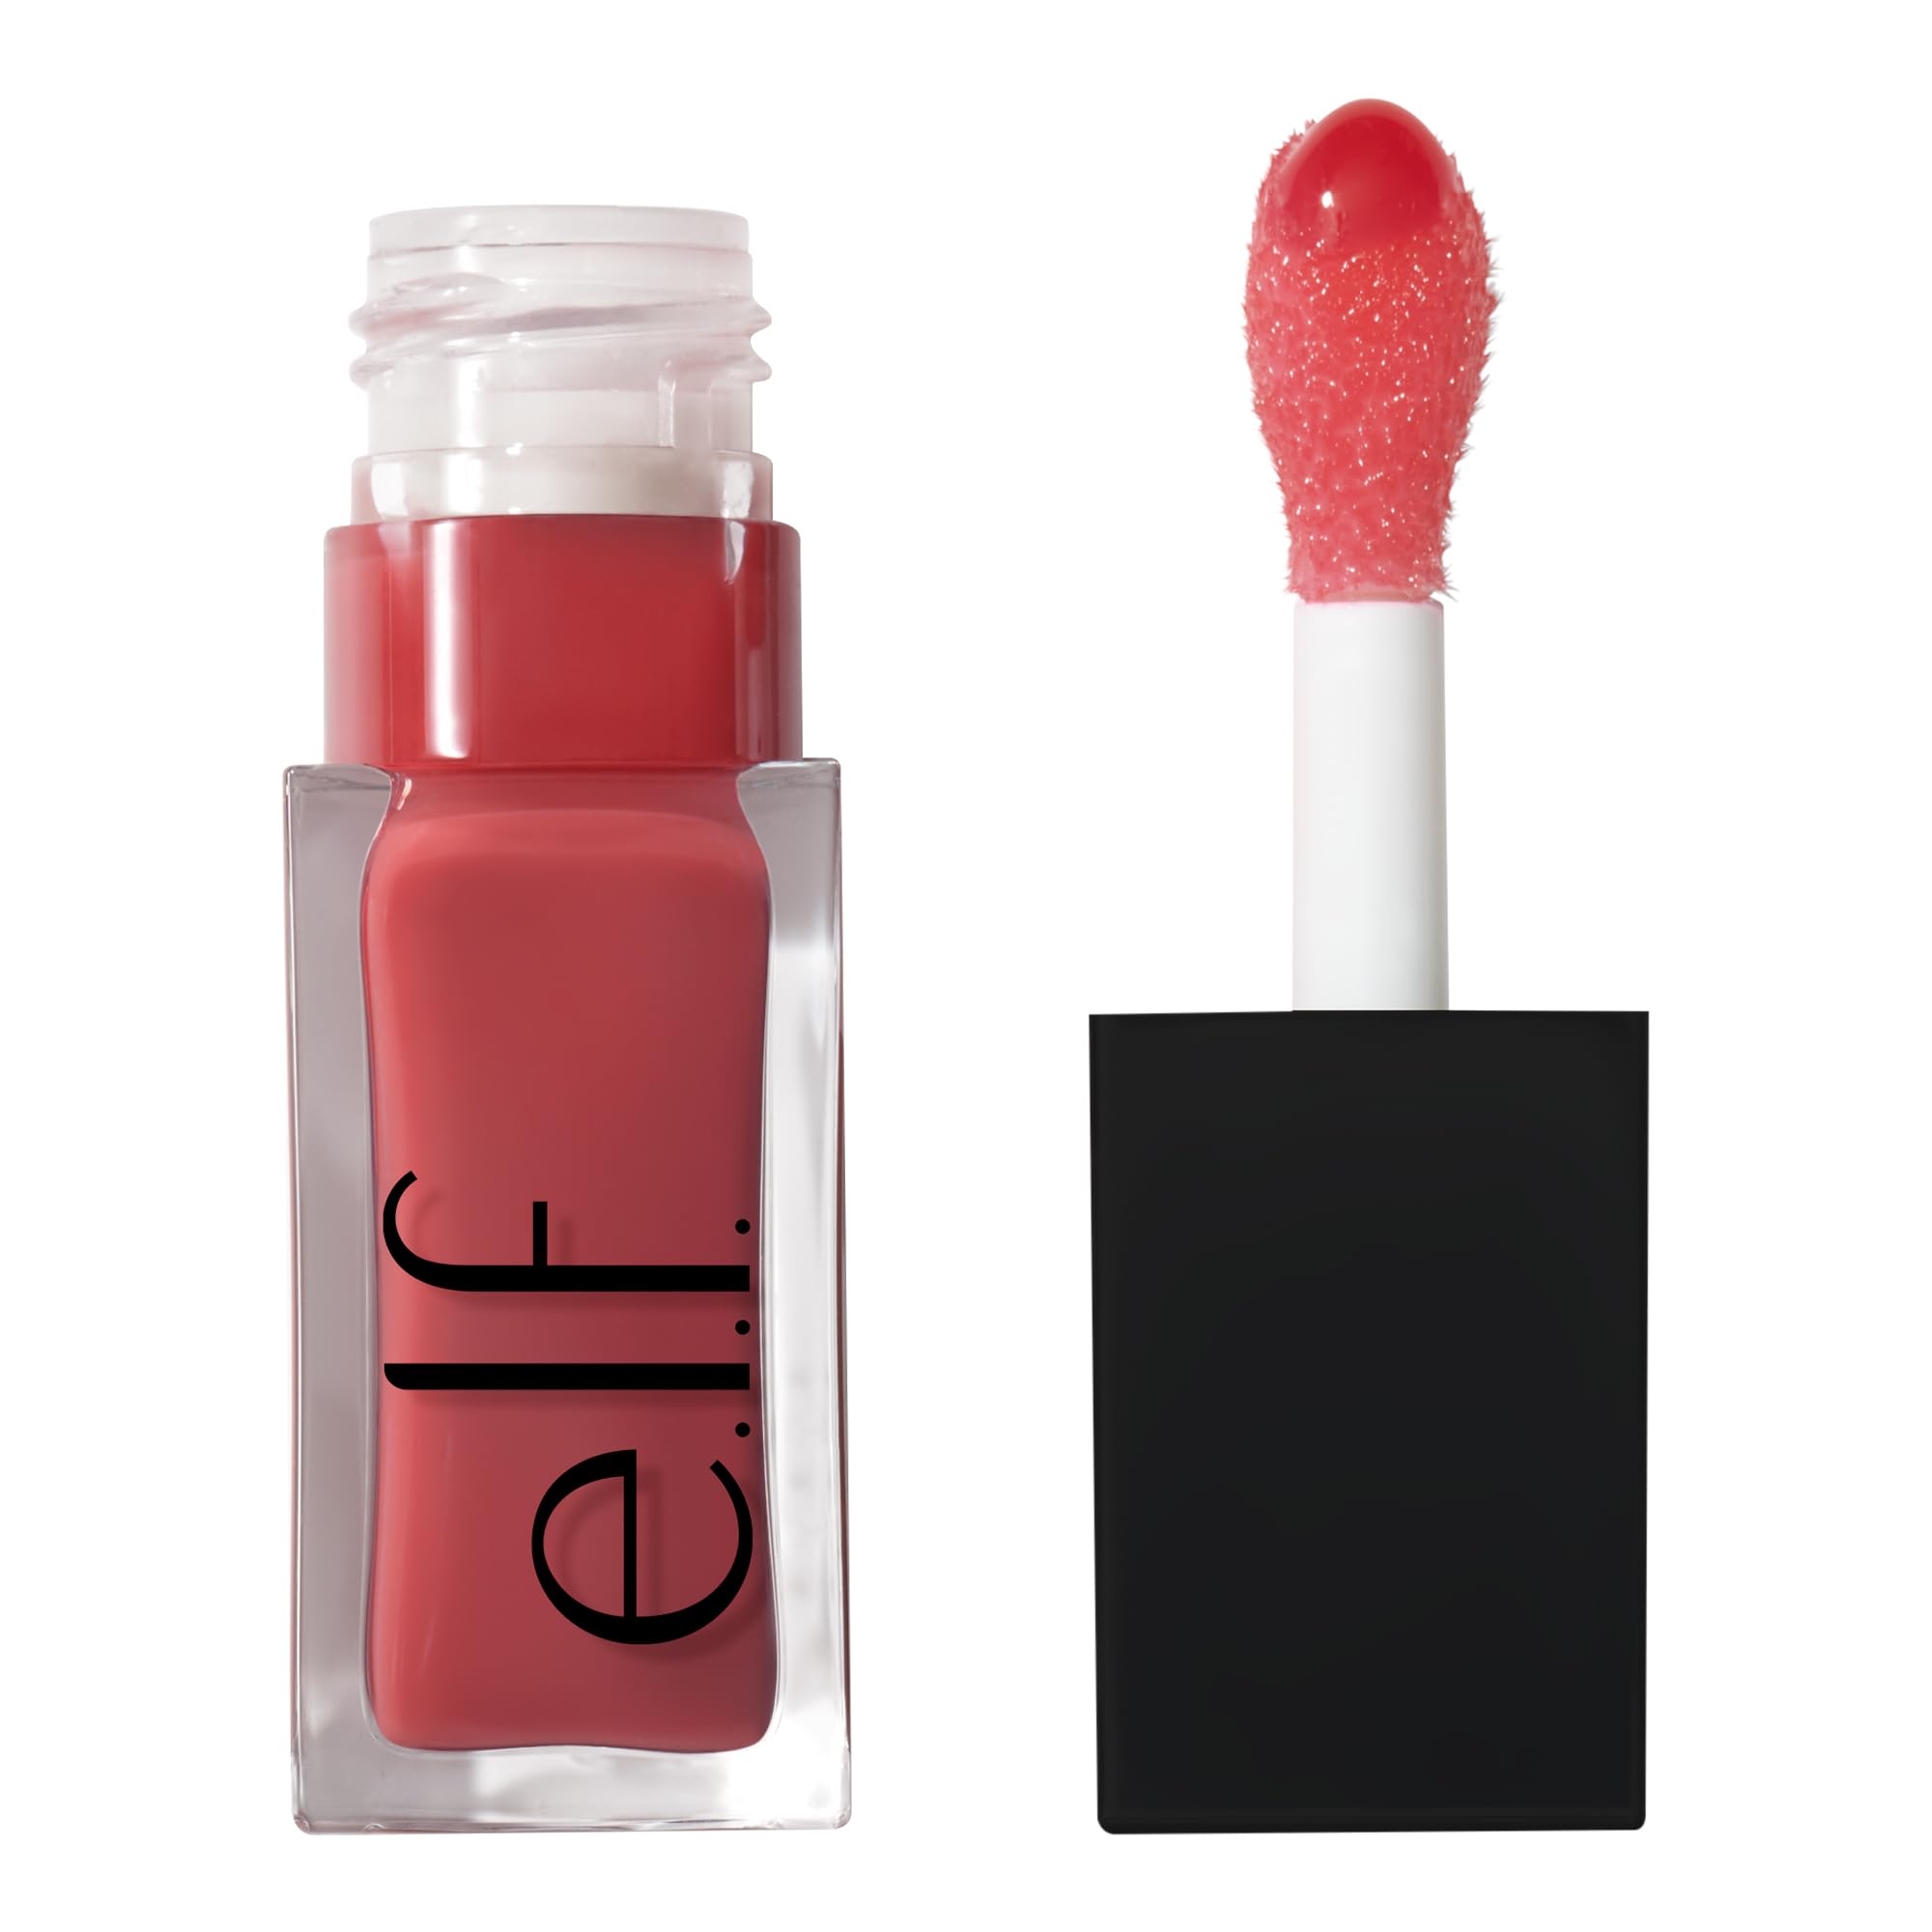 e.l.f. Glow Reviver Lip Oil, Nourishing Tinted Lip Oil For A High-shine Finish, Infused With Jojoba Oil, Vegan & Cruelty-free, Rose Envy